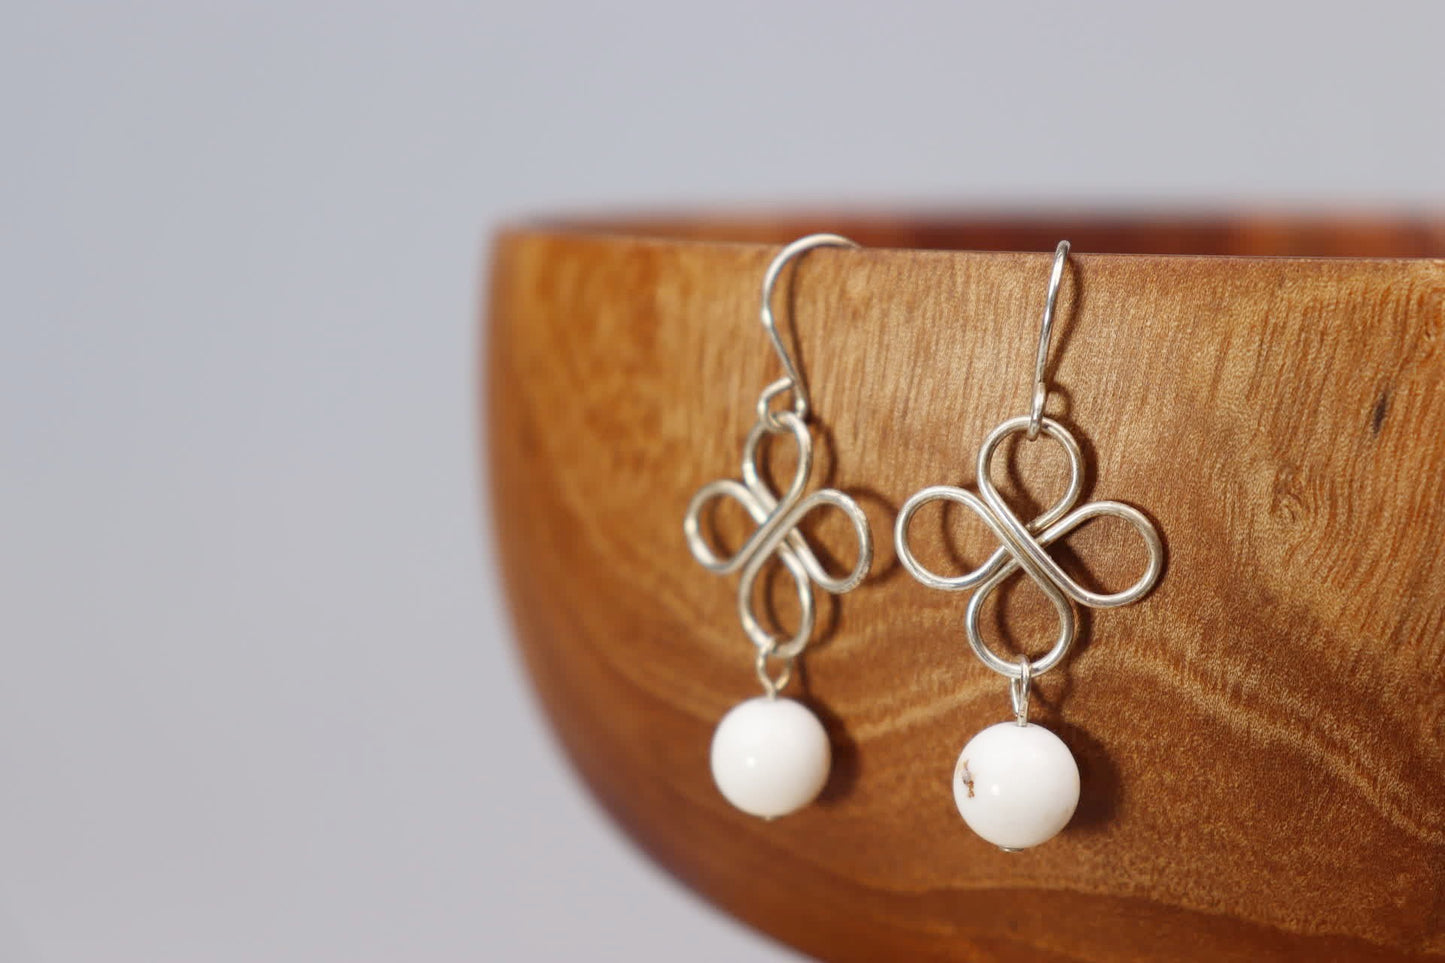 Clover Sterling Silver and White Turquoise Earrings